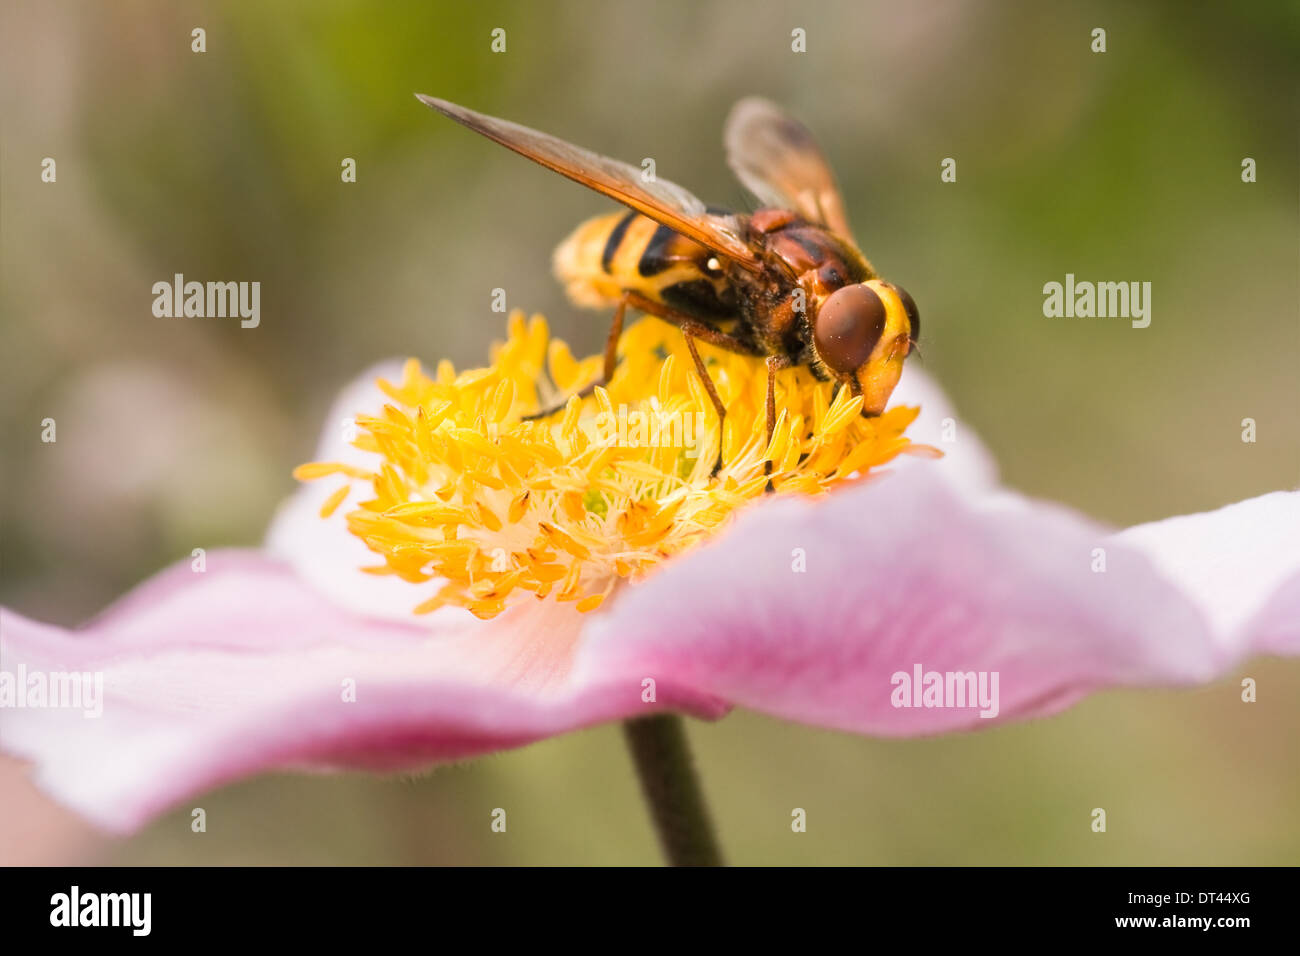 Big hoverfly on Japanese anemone or Anemone japonica flower in summer Stock Photo